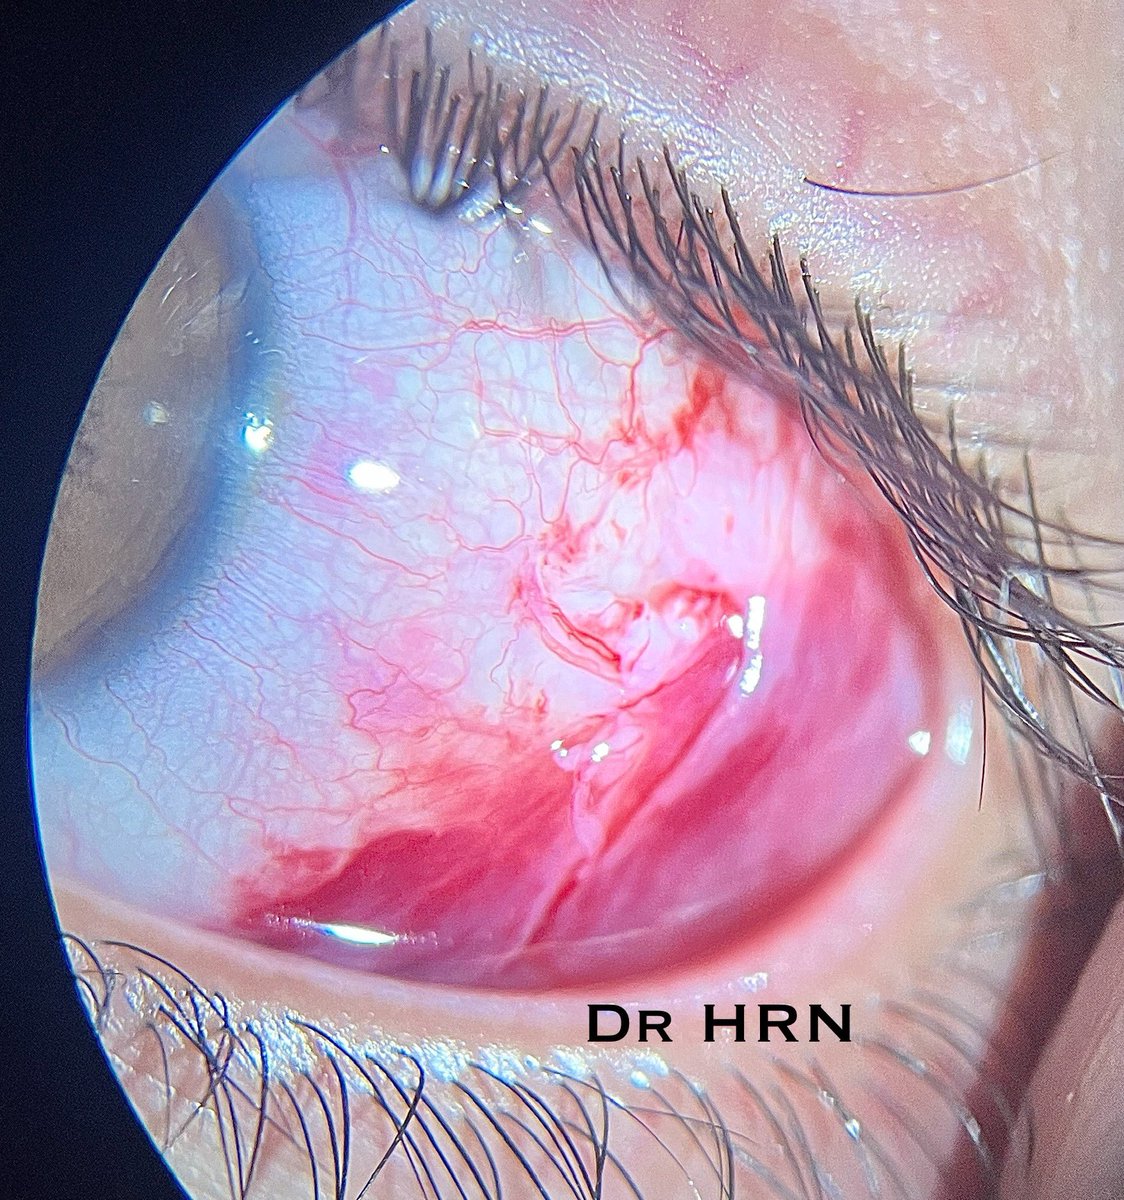 Conjunctival Tear in a child by an over friendly family cat when he was sleeping. 
I am sure the cat meant no harm. But #catlovers , you need to trim those nails. 

#Ophthalmology #OphthoTwitter #MedTwitter #PatientCare